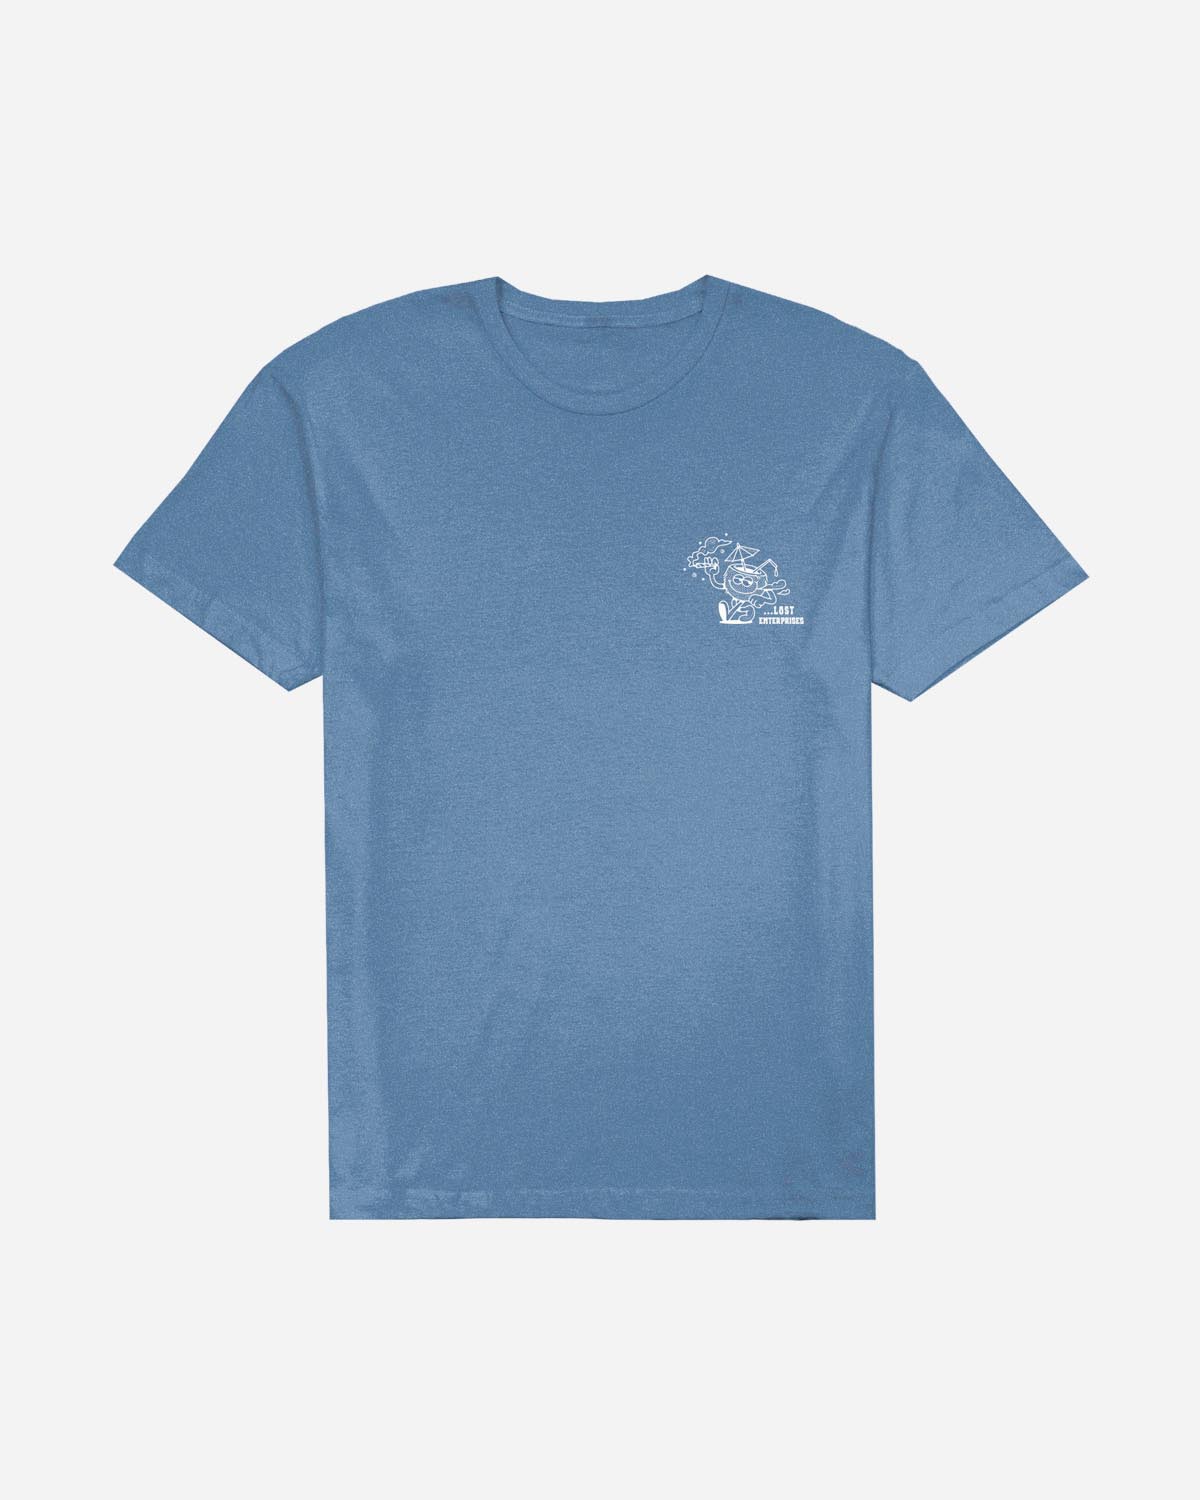 Blue T-Shirts for Sale